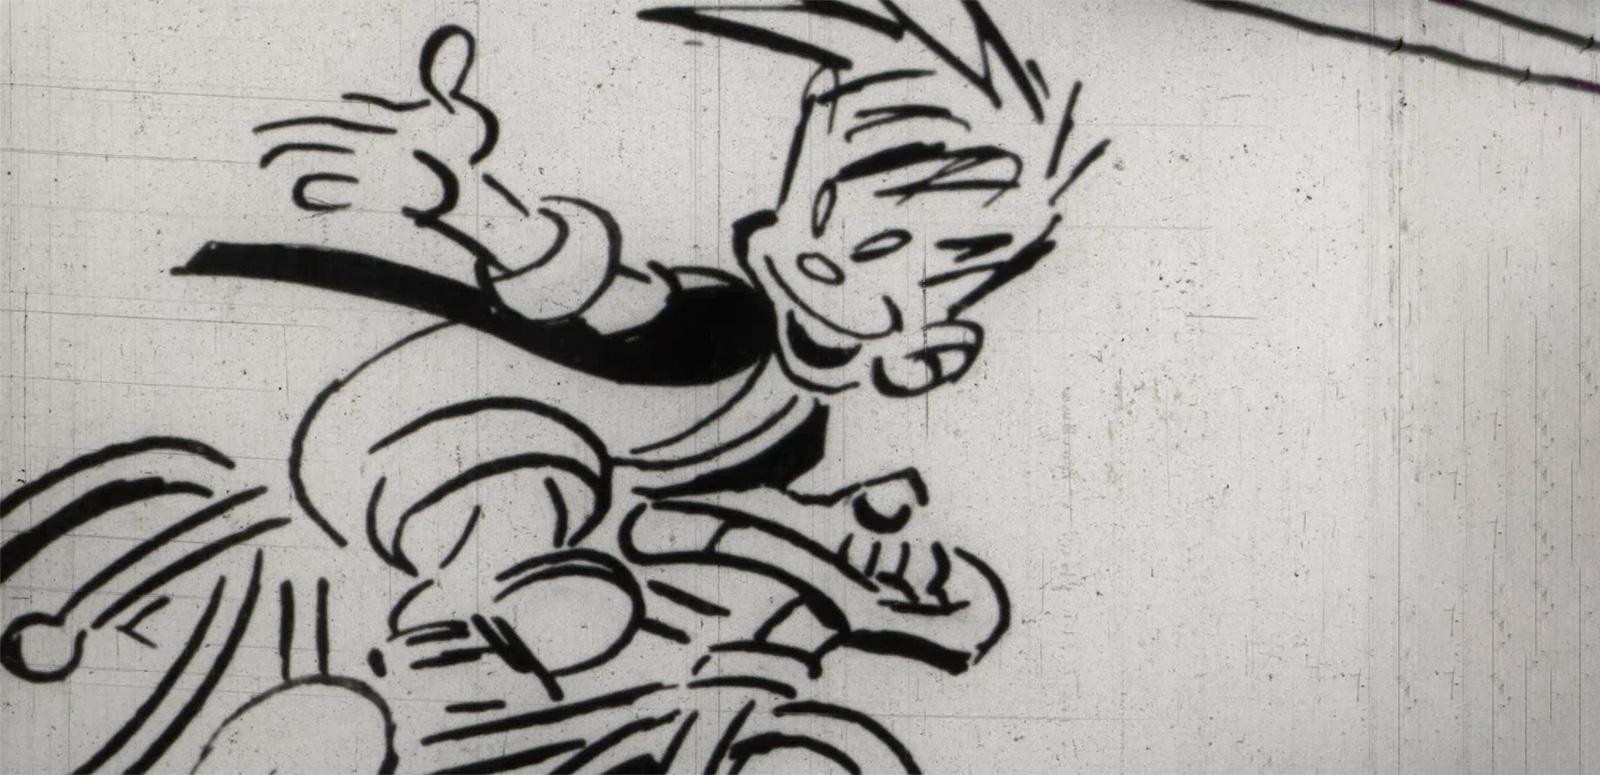 Cartoon character Ginger Meggs riding his bicycle, looking back over his shoulder with his thumb up